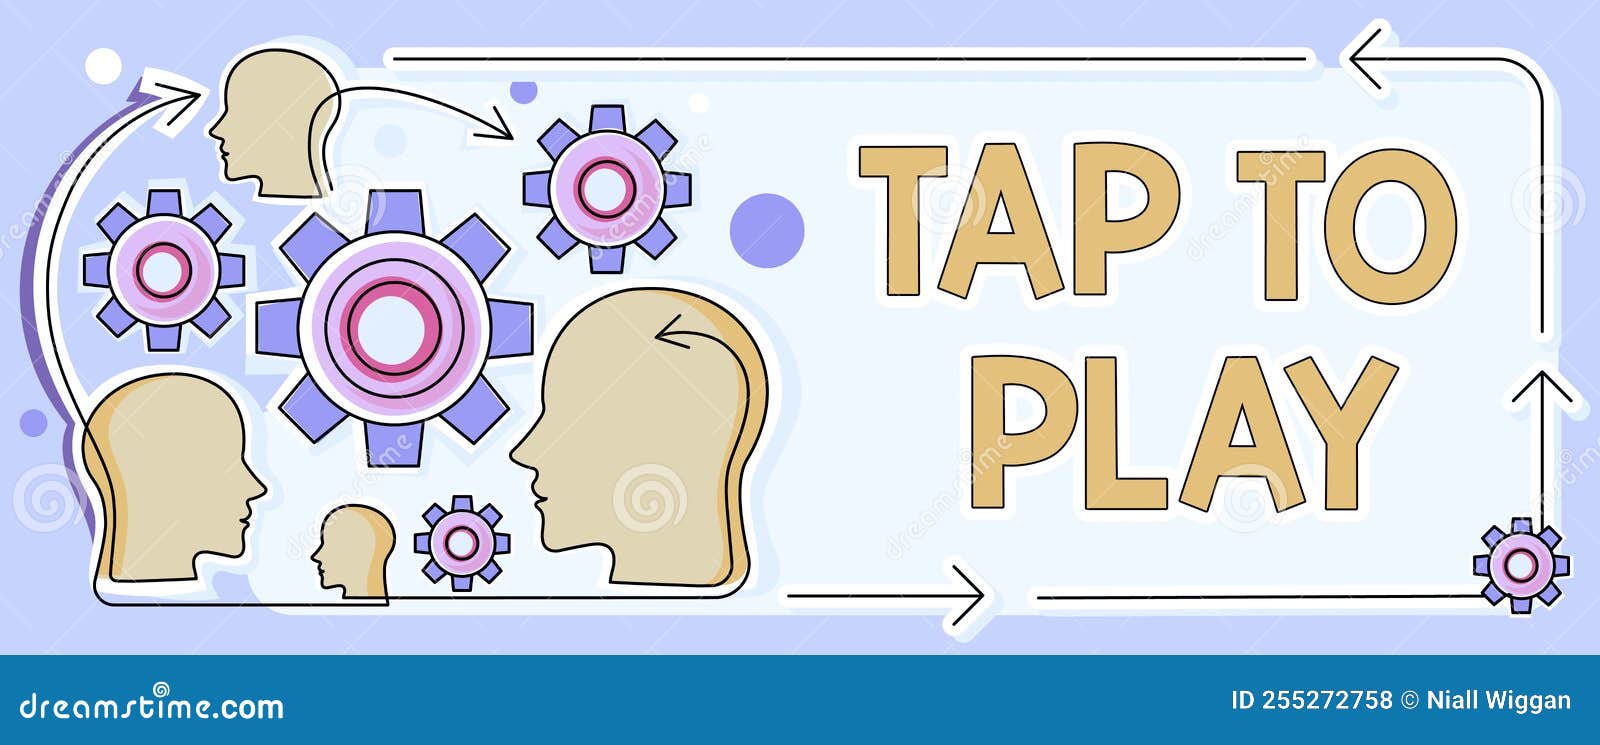 Sign Displaying Tap To Play. Concept Meaning Touch the Screen To